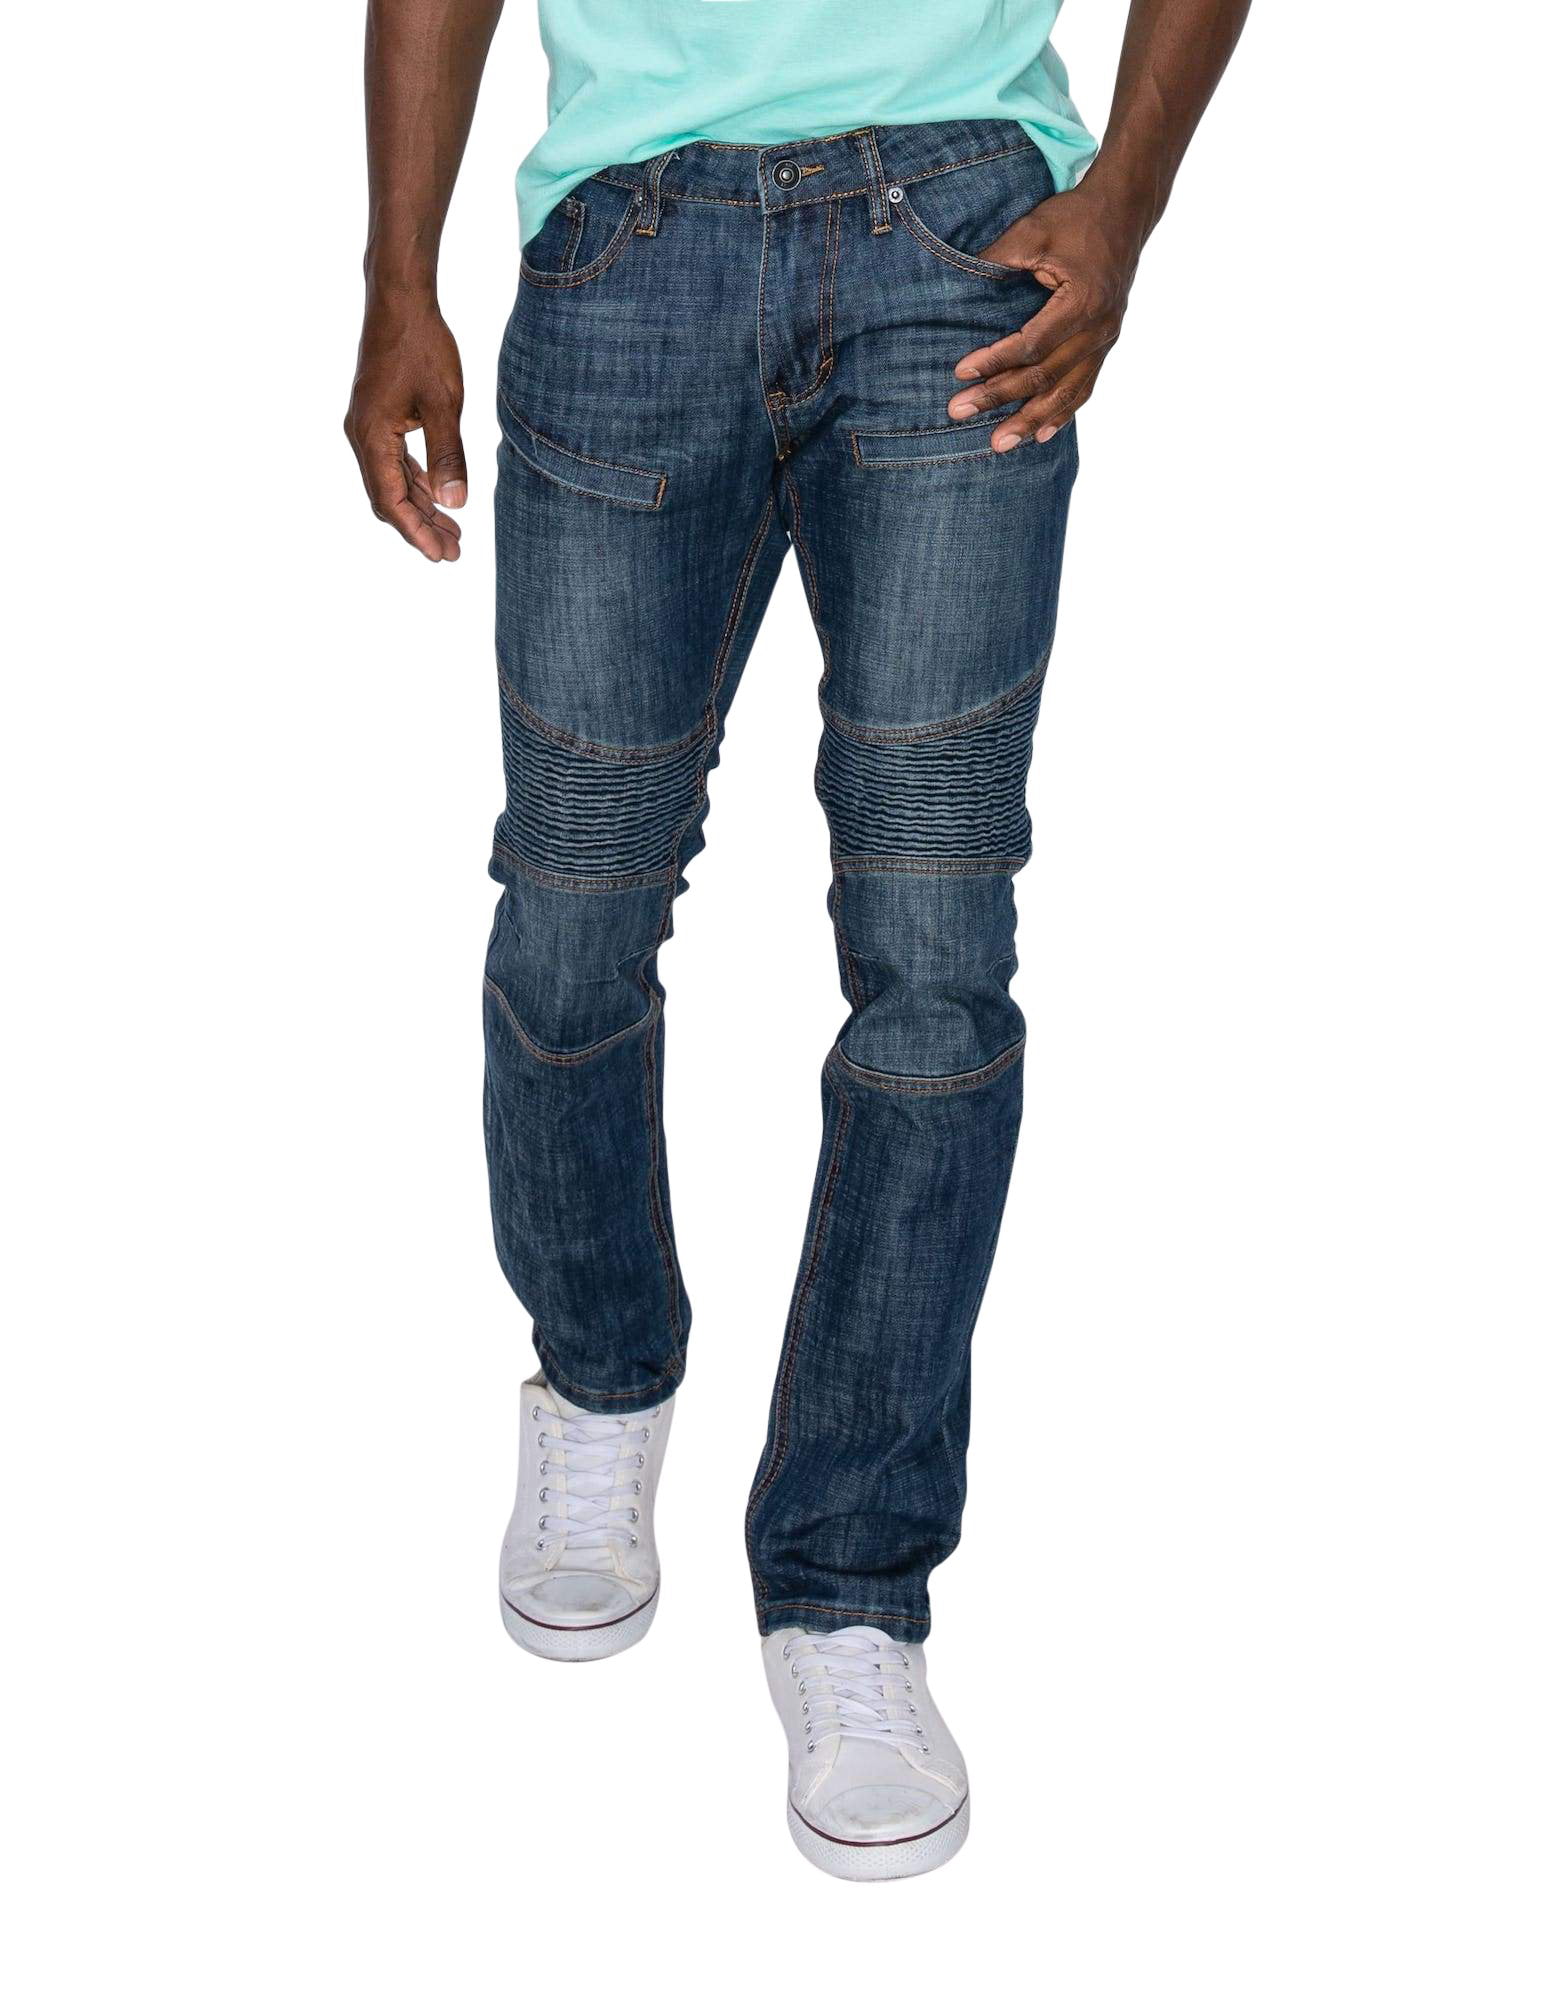 ring of fire mens jeans